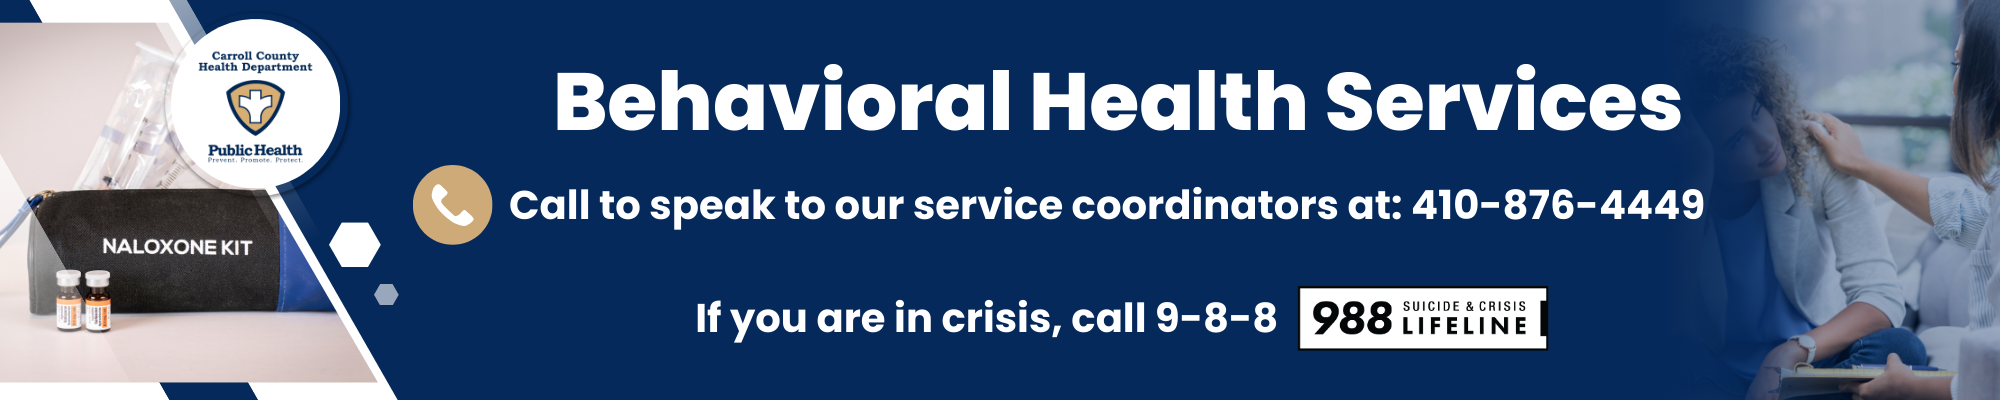 Behavioral Health Services banner with images of naloxone kit and client talking to staff, call 988 if you are in crisis.